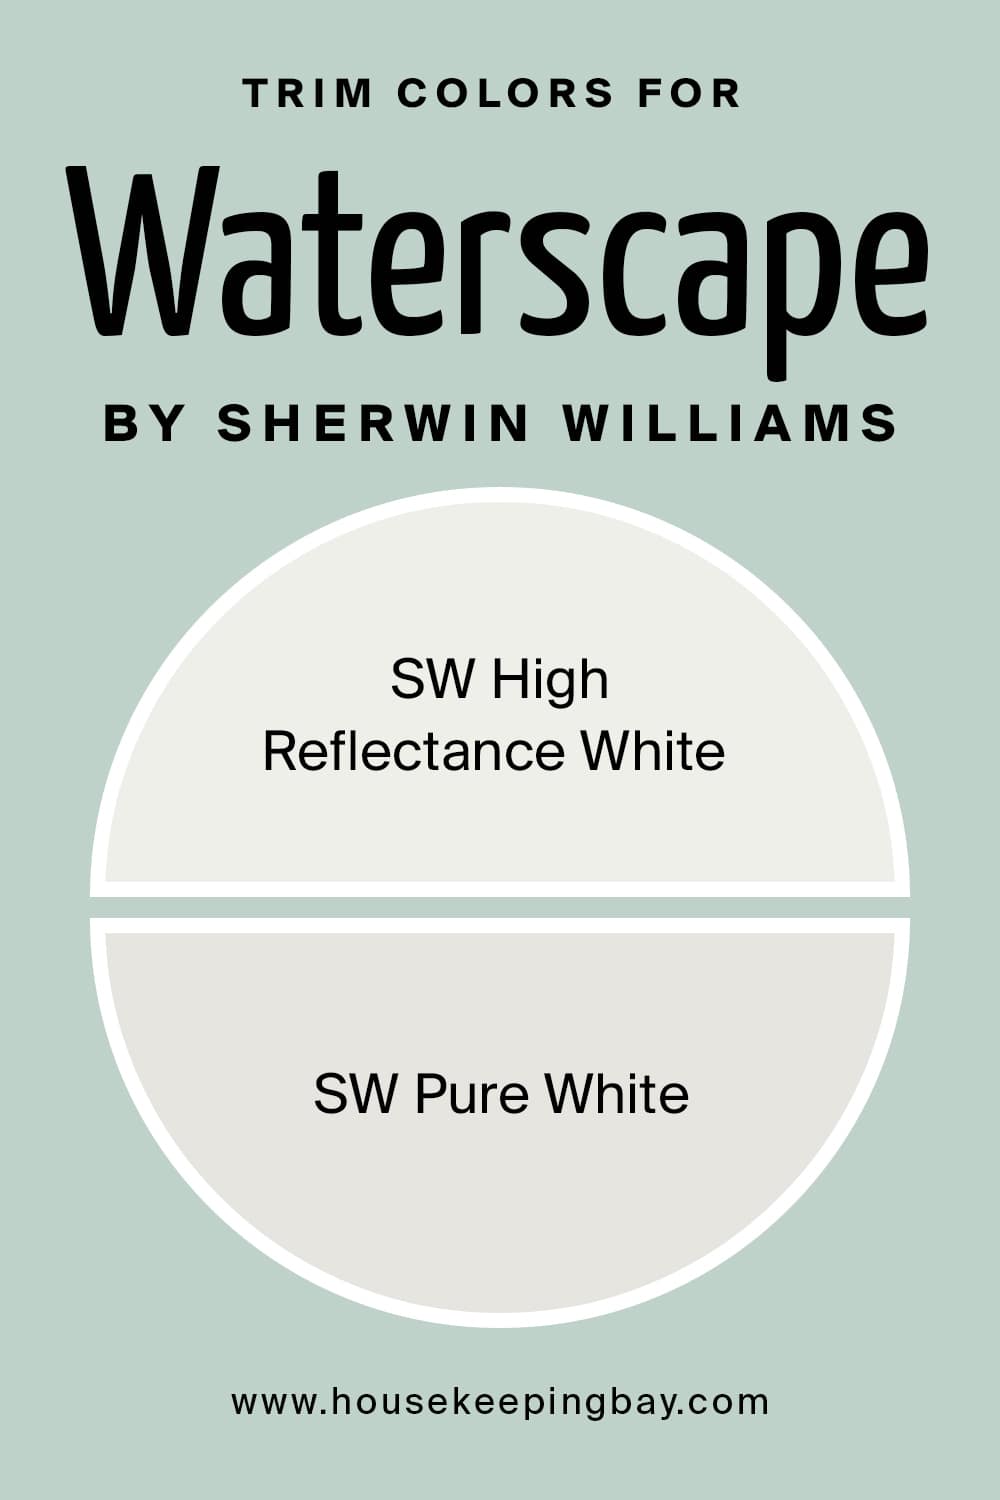 Trim Colors for Waterscape by Sherwin Williams